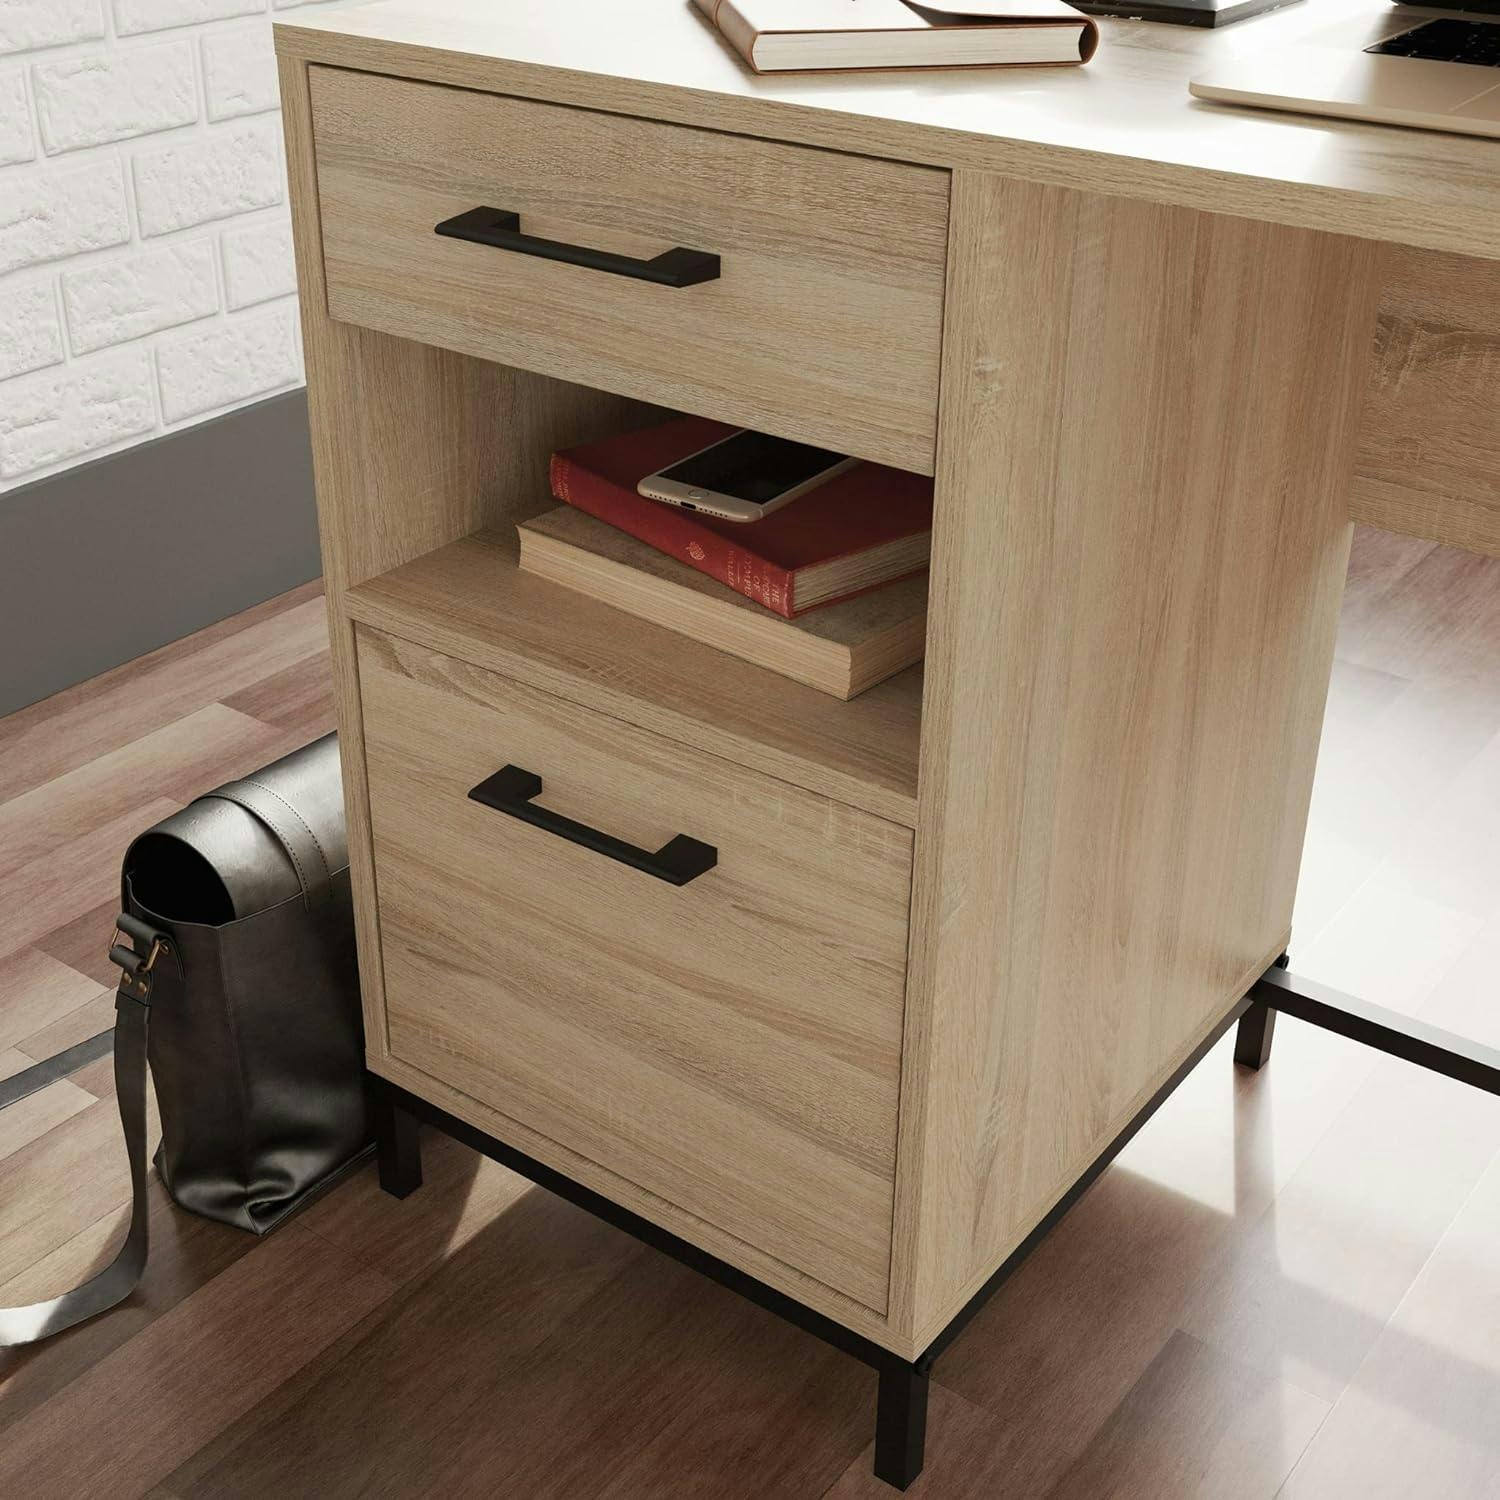 Charter Oak Finish Minimalist Home Office Desk with Drawers